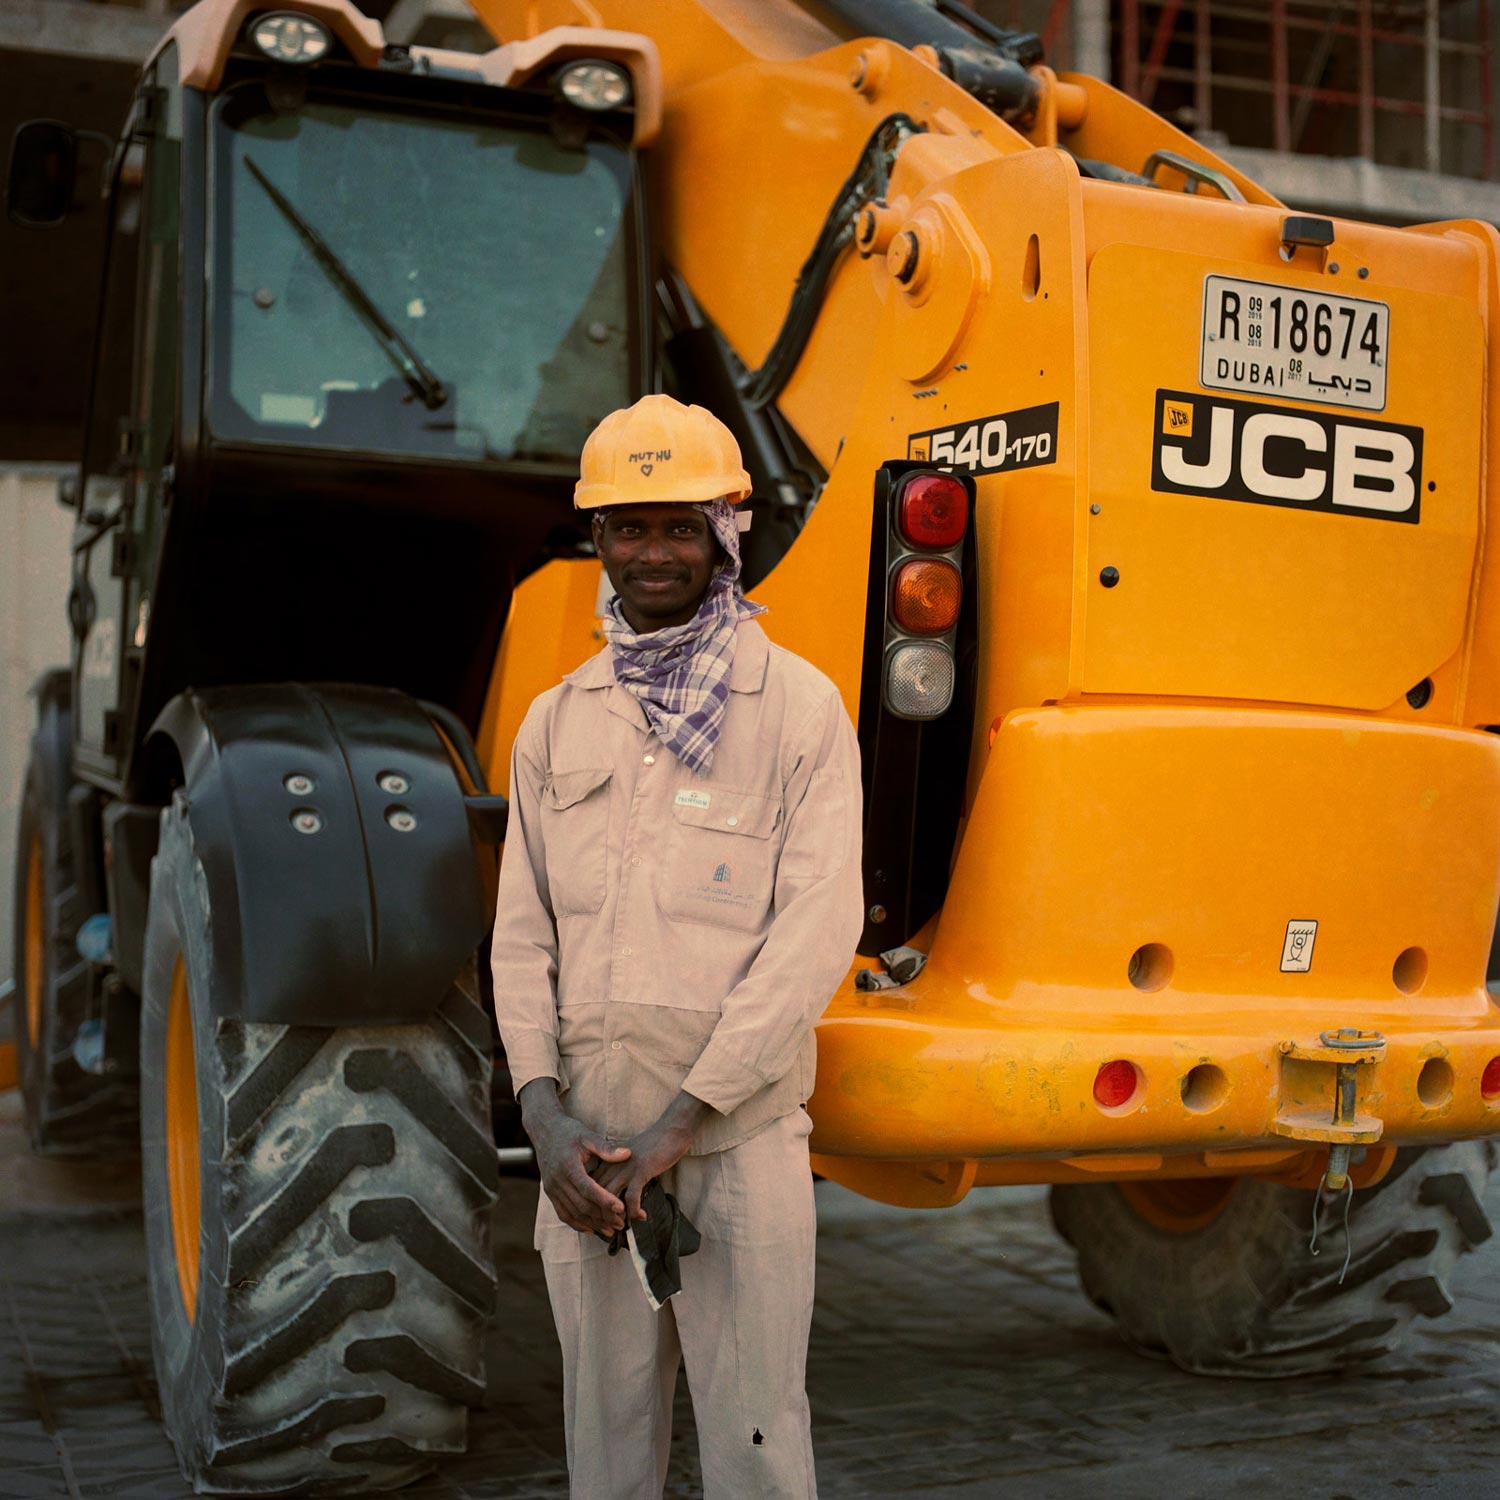 Indian construction workers in Dubai, pose together on site.